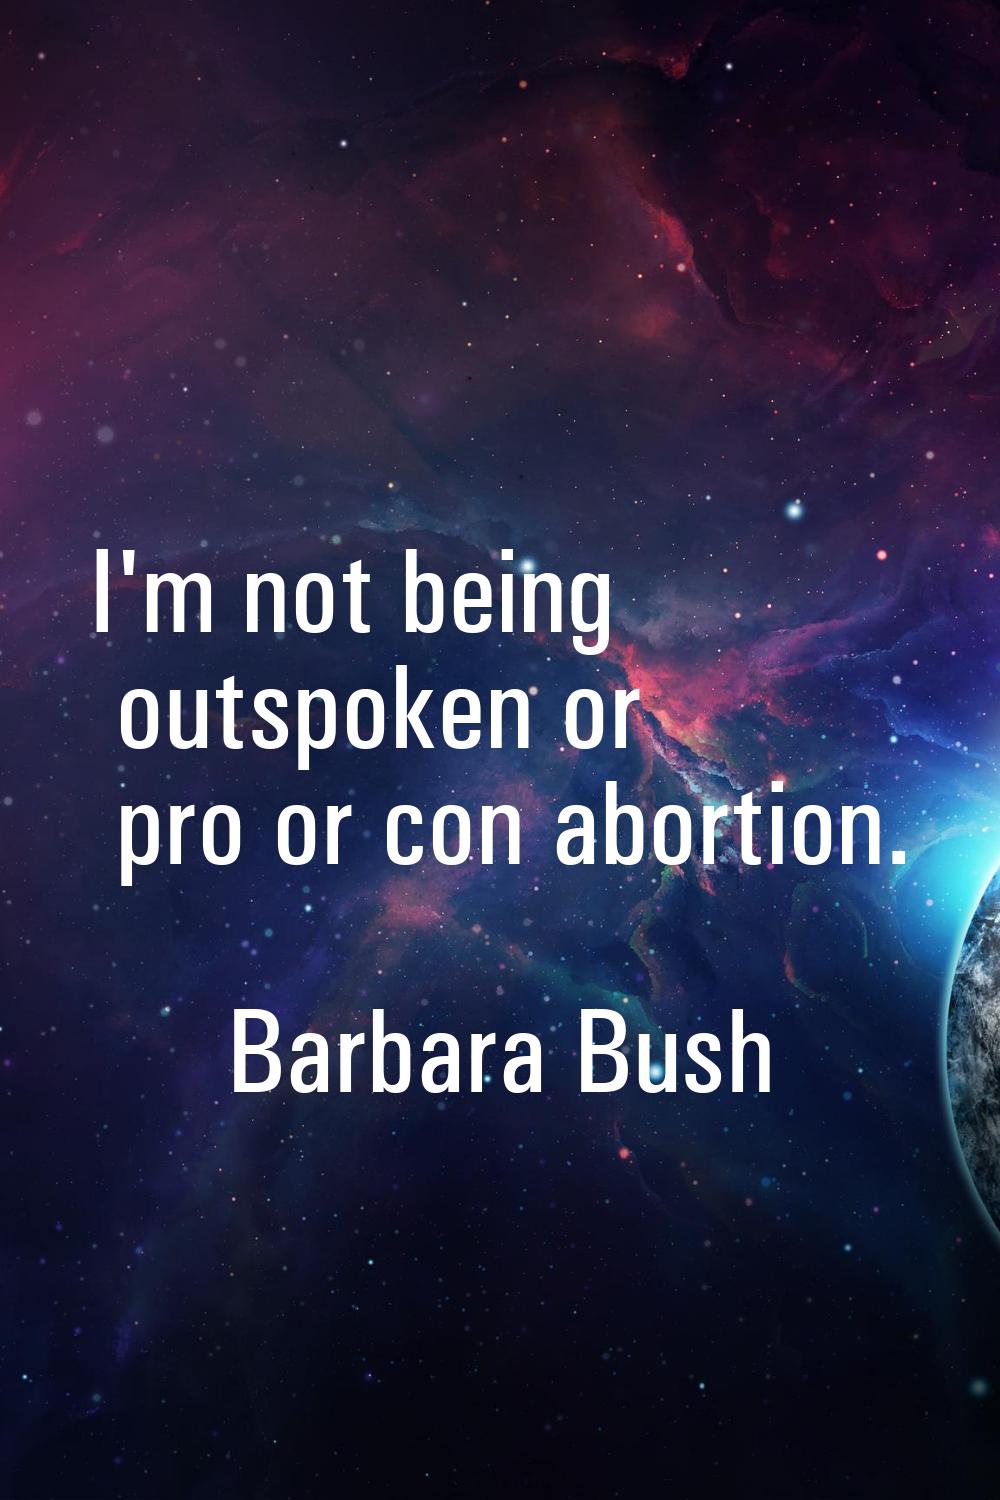 I'm not being outspoken or pro or con abortion.